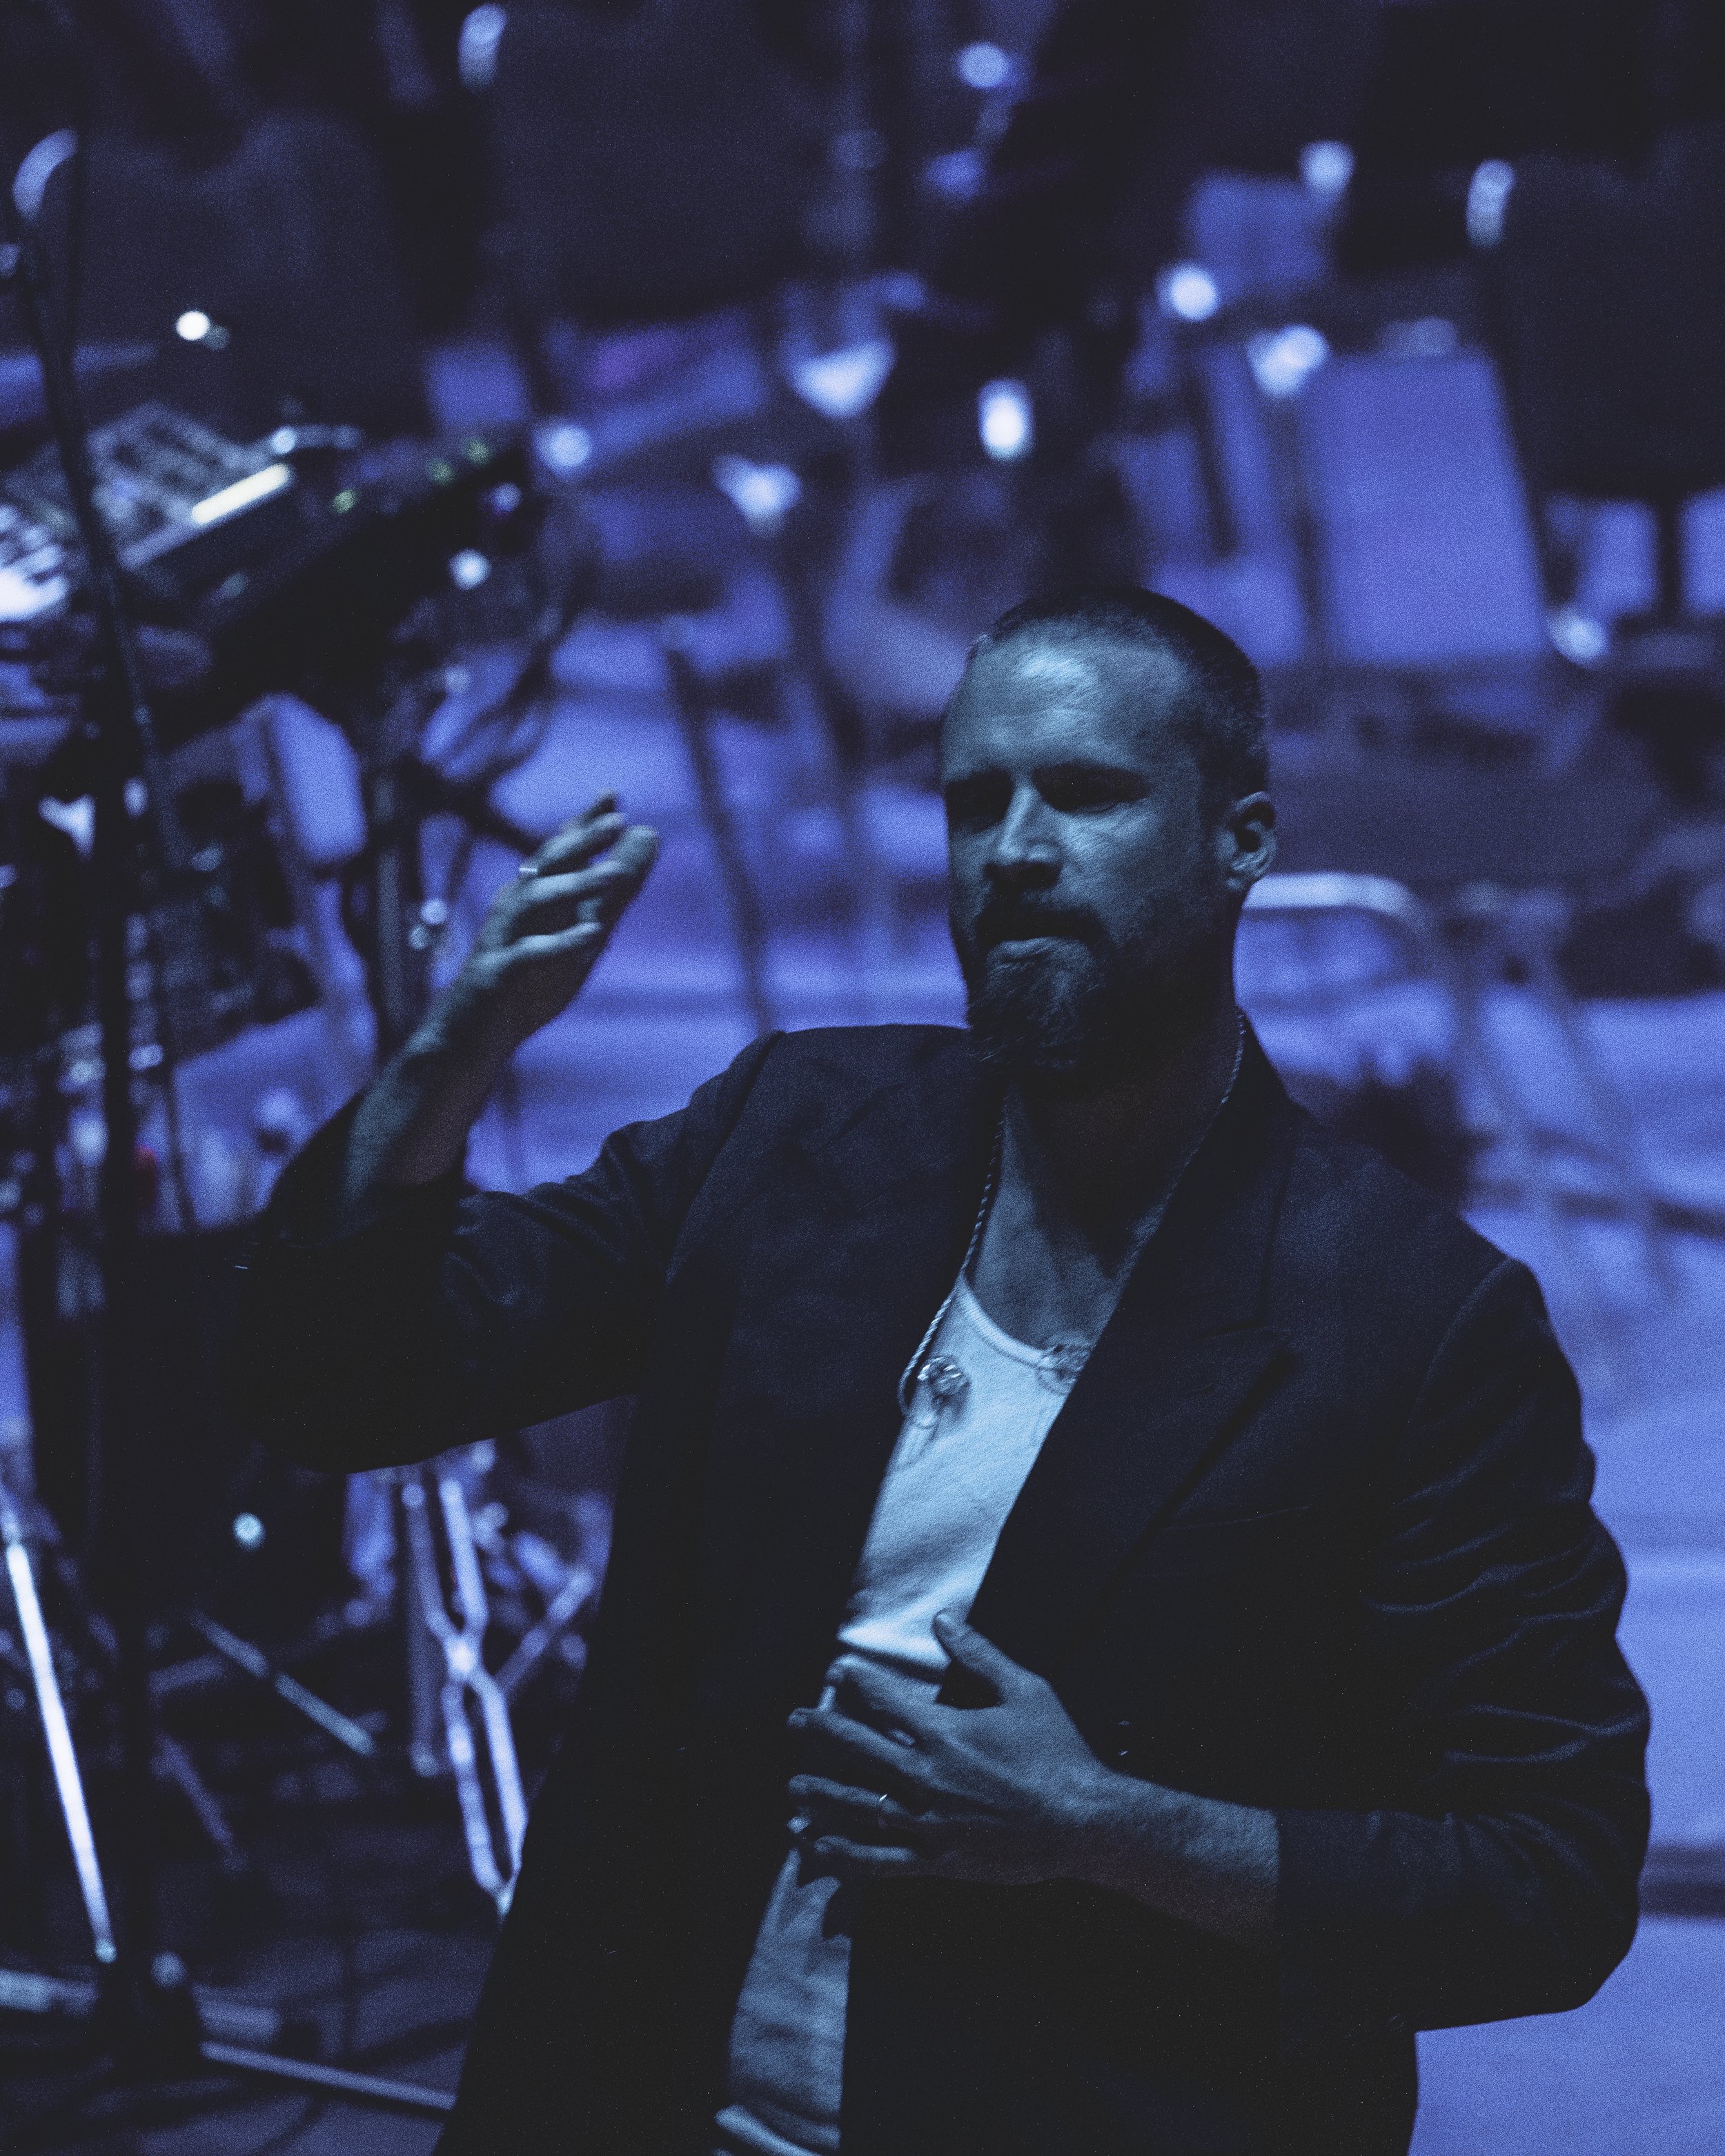 FATHER JOHN MISTY WITH THE COLORADO SYMPHONY - Red Rocks Amphitheatre - Morrison, Colorado - Sunday, July 31, 2022 - PHOTO BY Mowgli Miles of Interracial Friends-86.JPG